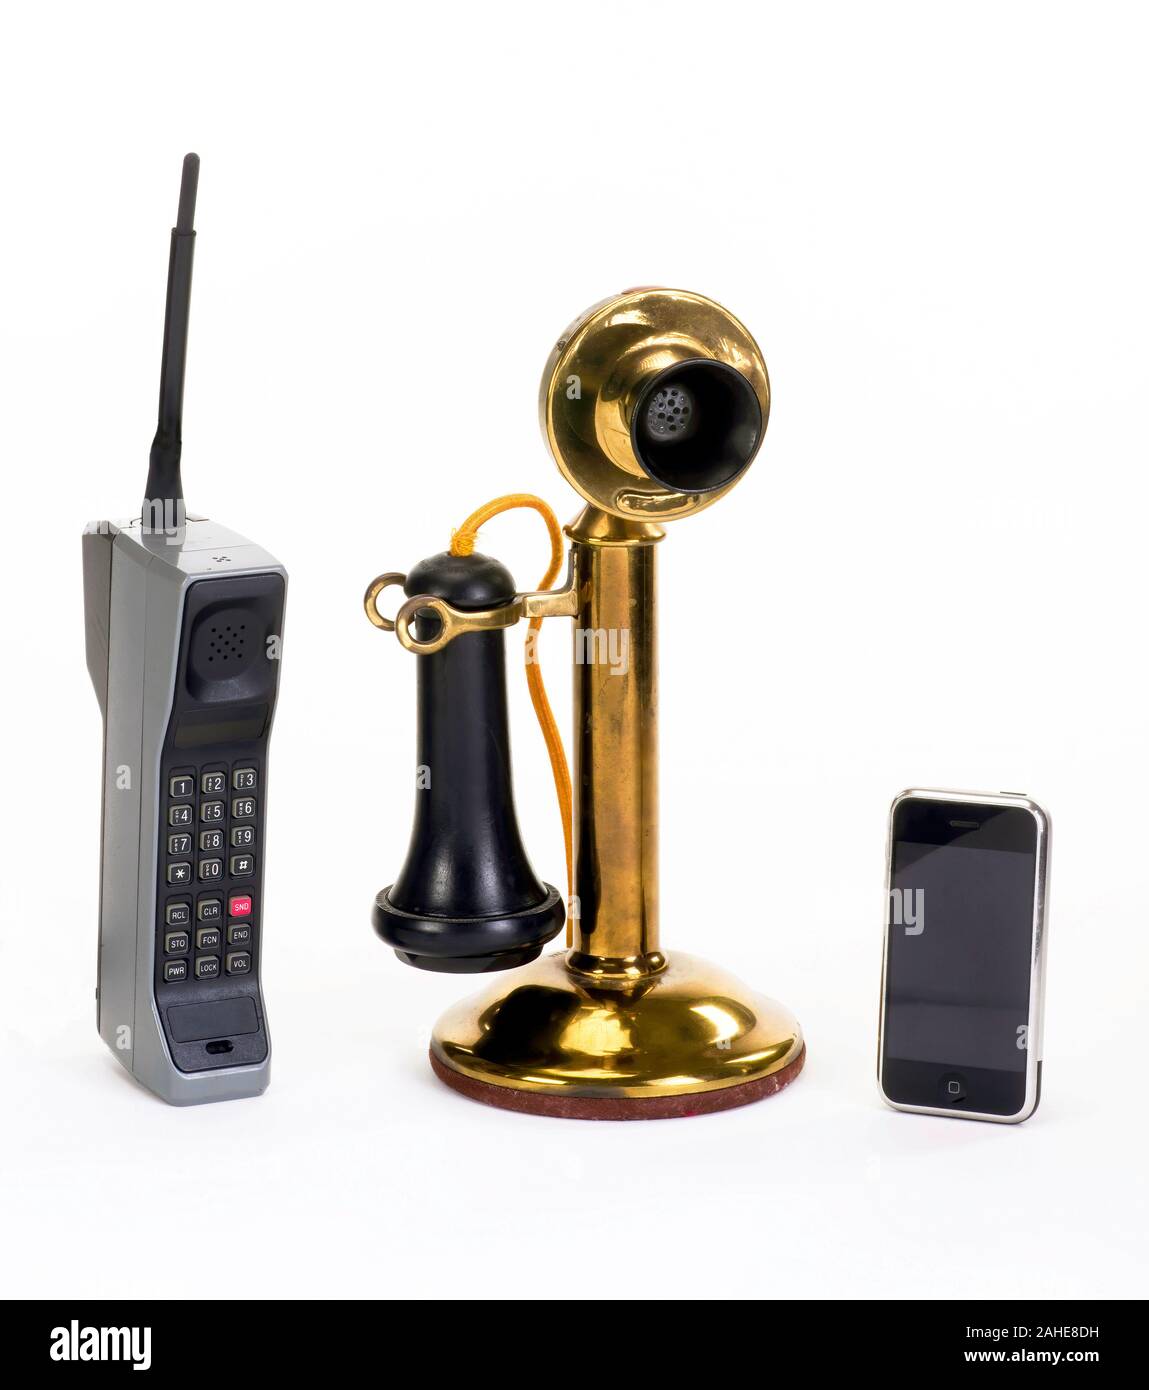 First brick cell phone made around 1980, early candle stick phone made around 1910 and modern smart phone. Stock Photo